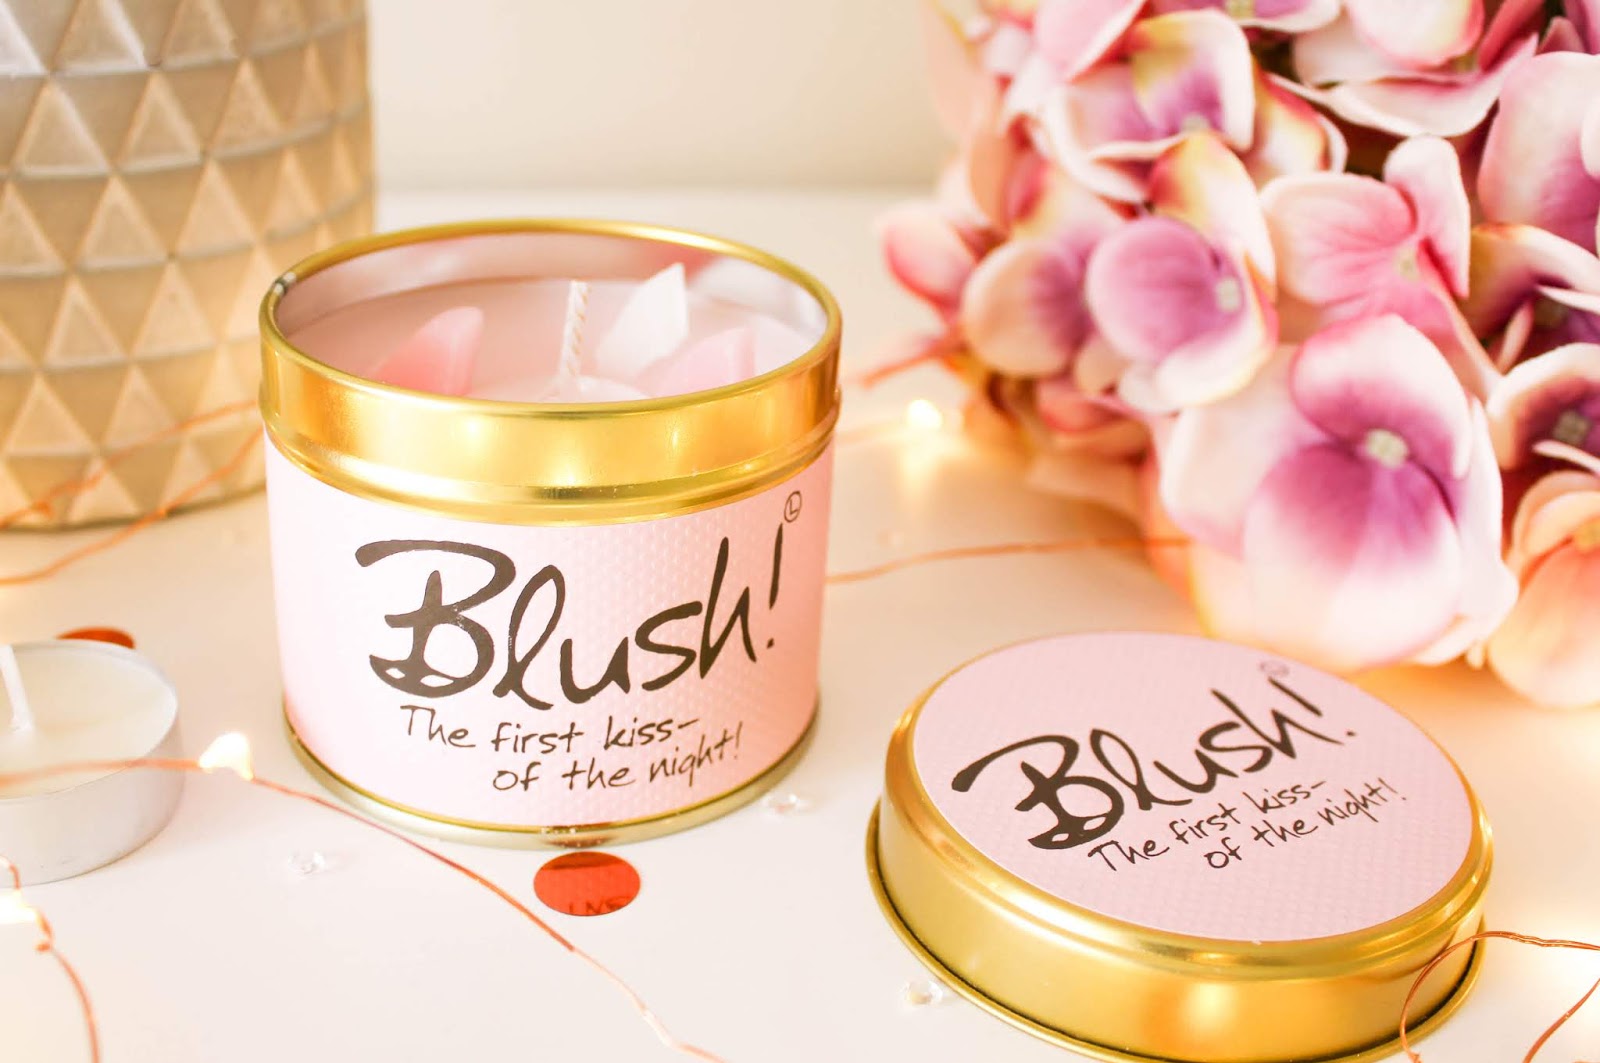 Lily-Flame Blush Scented Candle Tin - The First Kiss Of The Night!